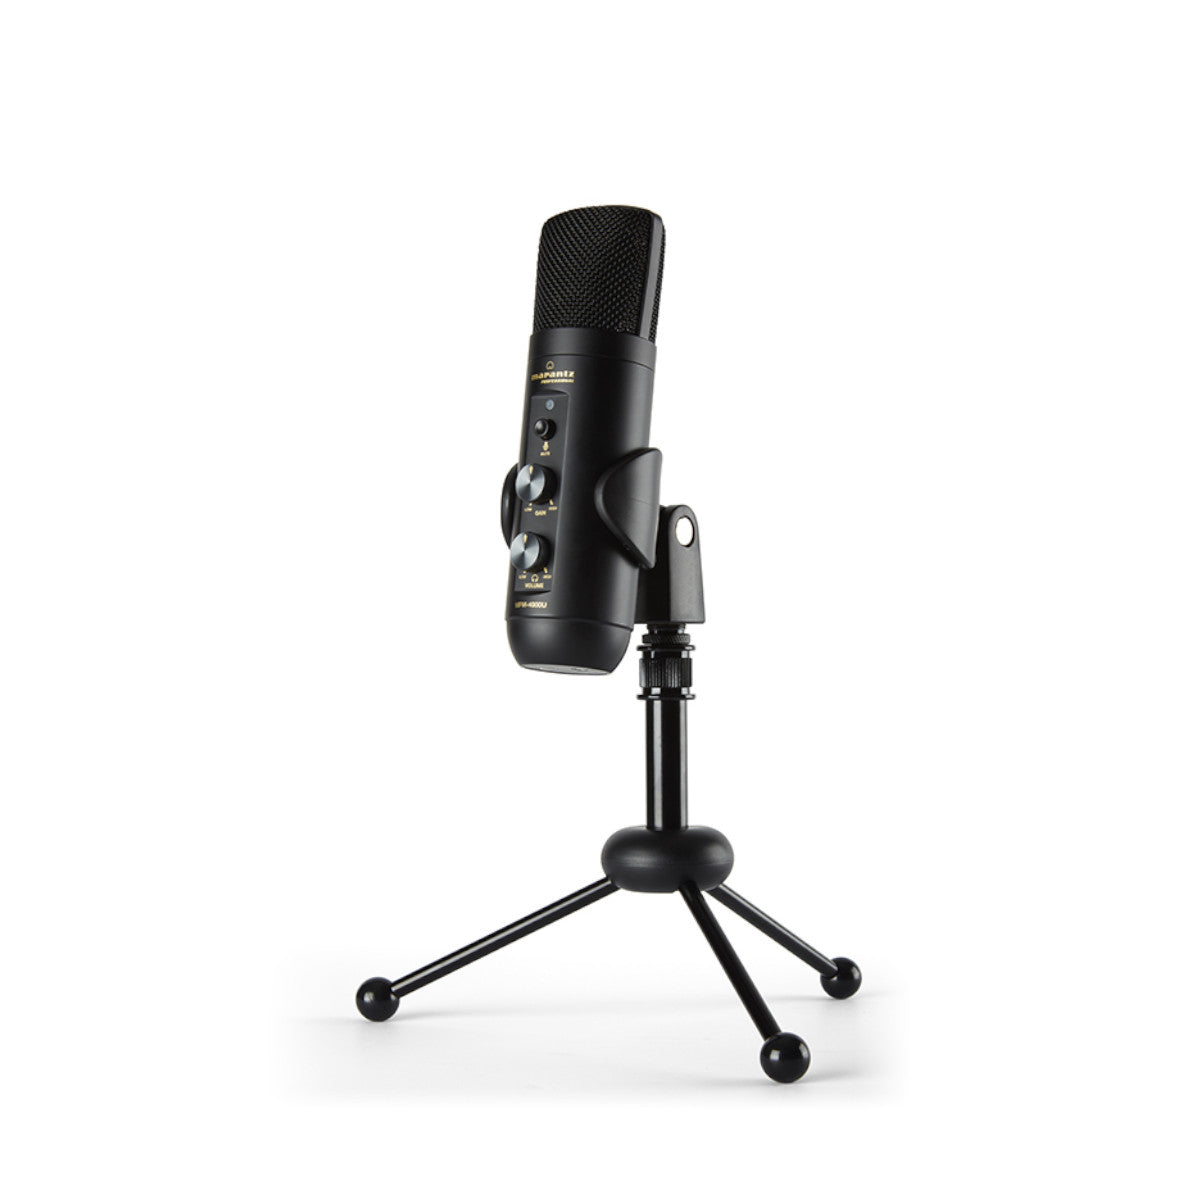 Marantz Professional MPM-4000U Podcast Mic - USB Podcasting Microphone With Built-in Mixer and Headphone Output - Ooberpad India